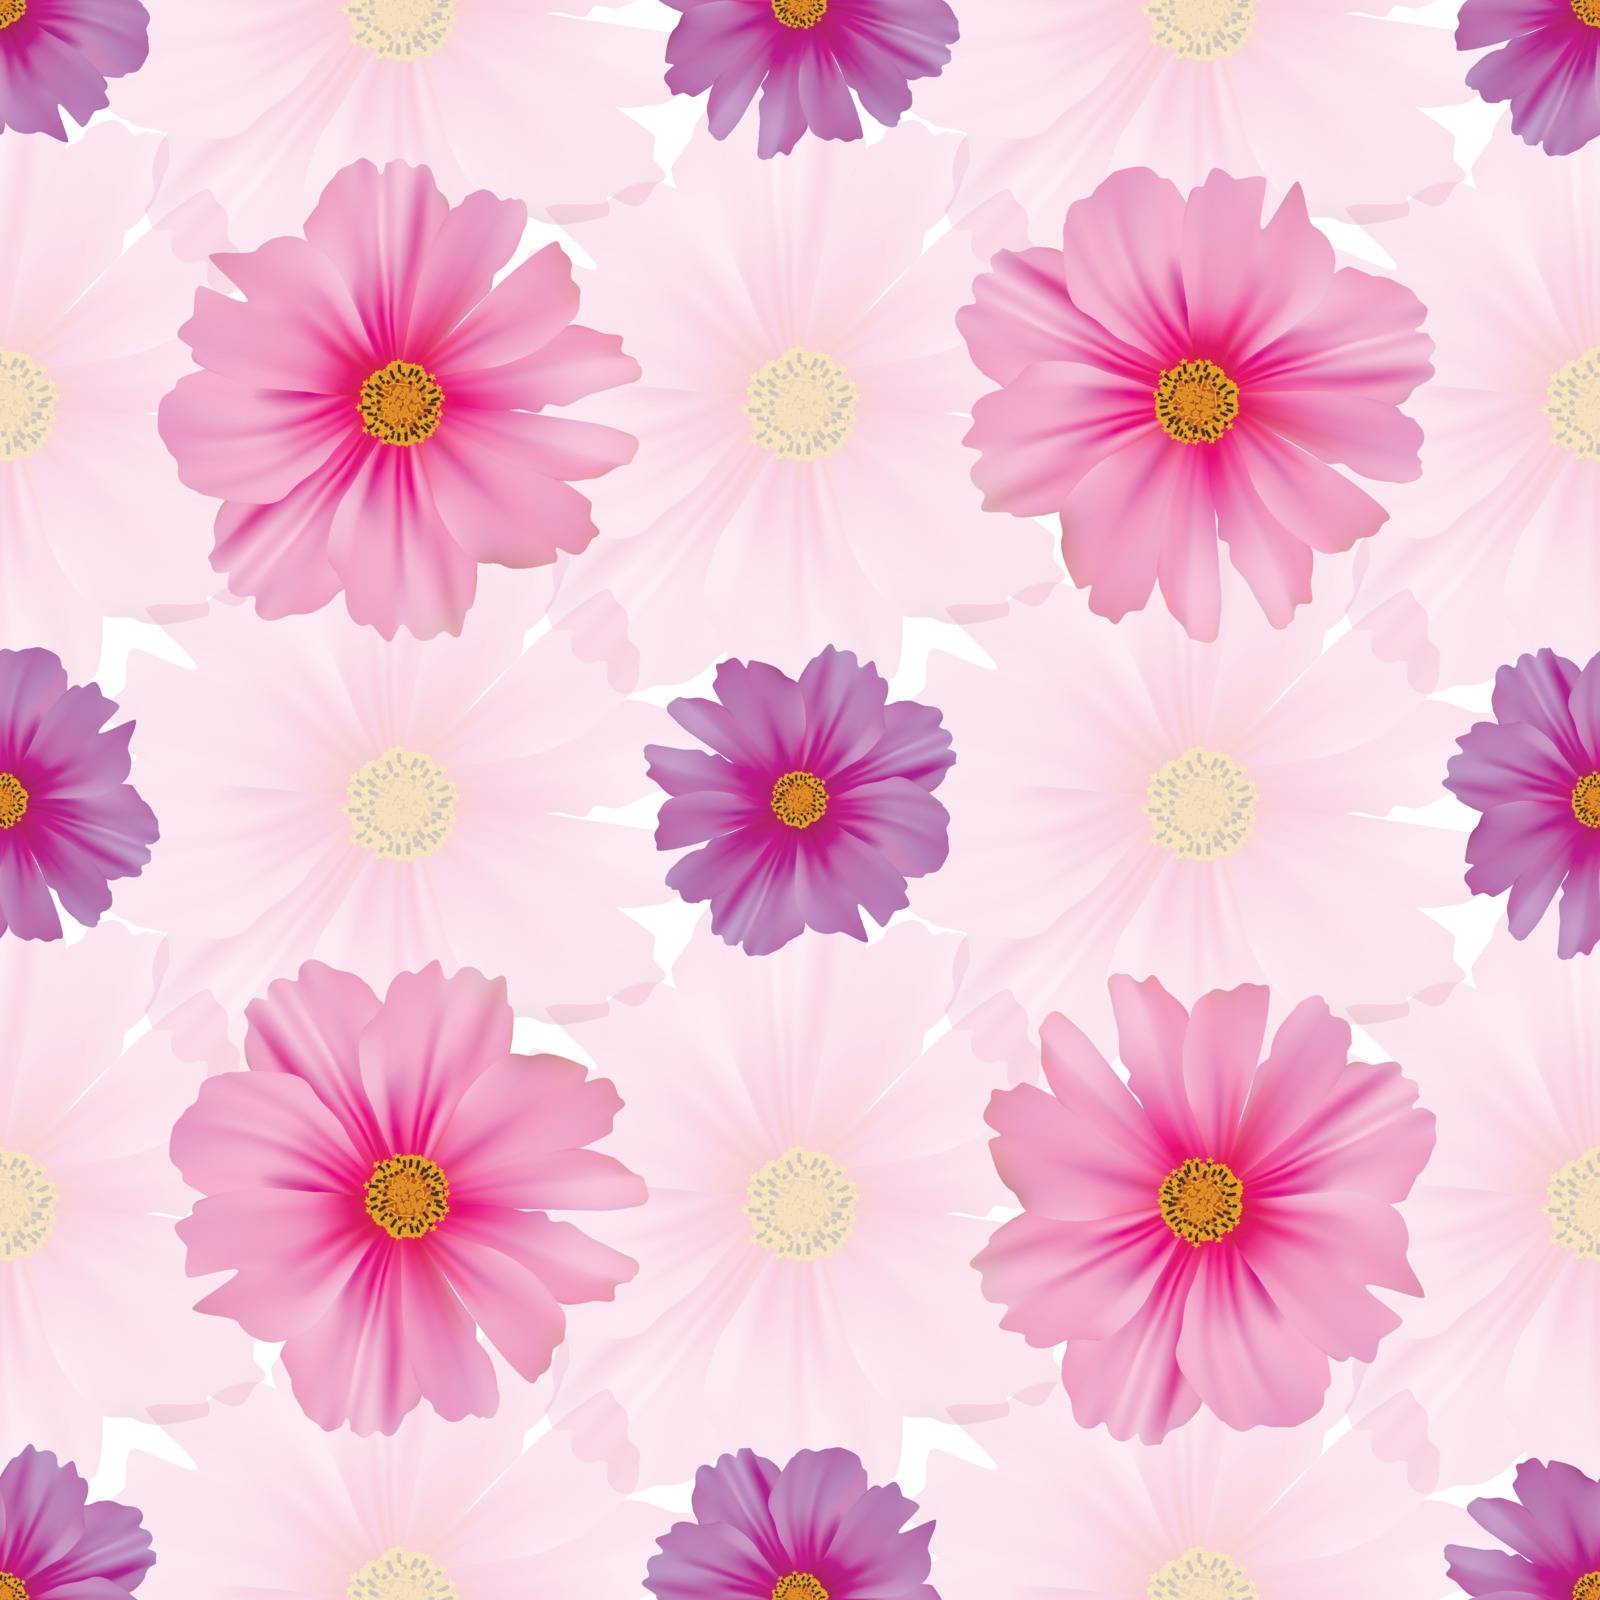 Seamless pattern with cosmos flower by Invikto